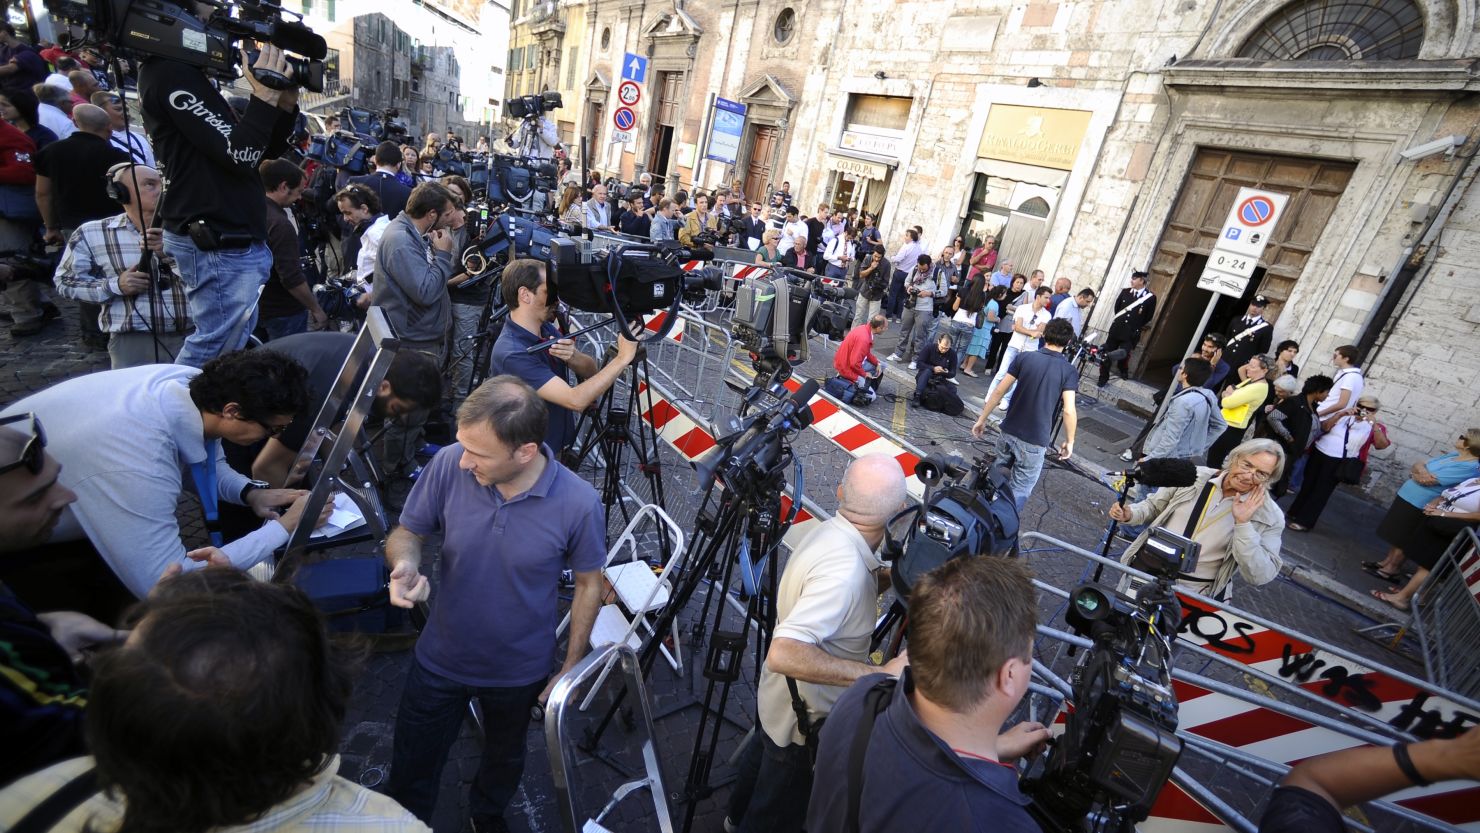 The appeal hearing in Perugia for Amanda Knox and Raffaele Sollecito attracted worldwide media interest.